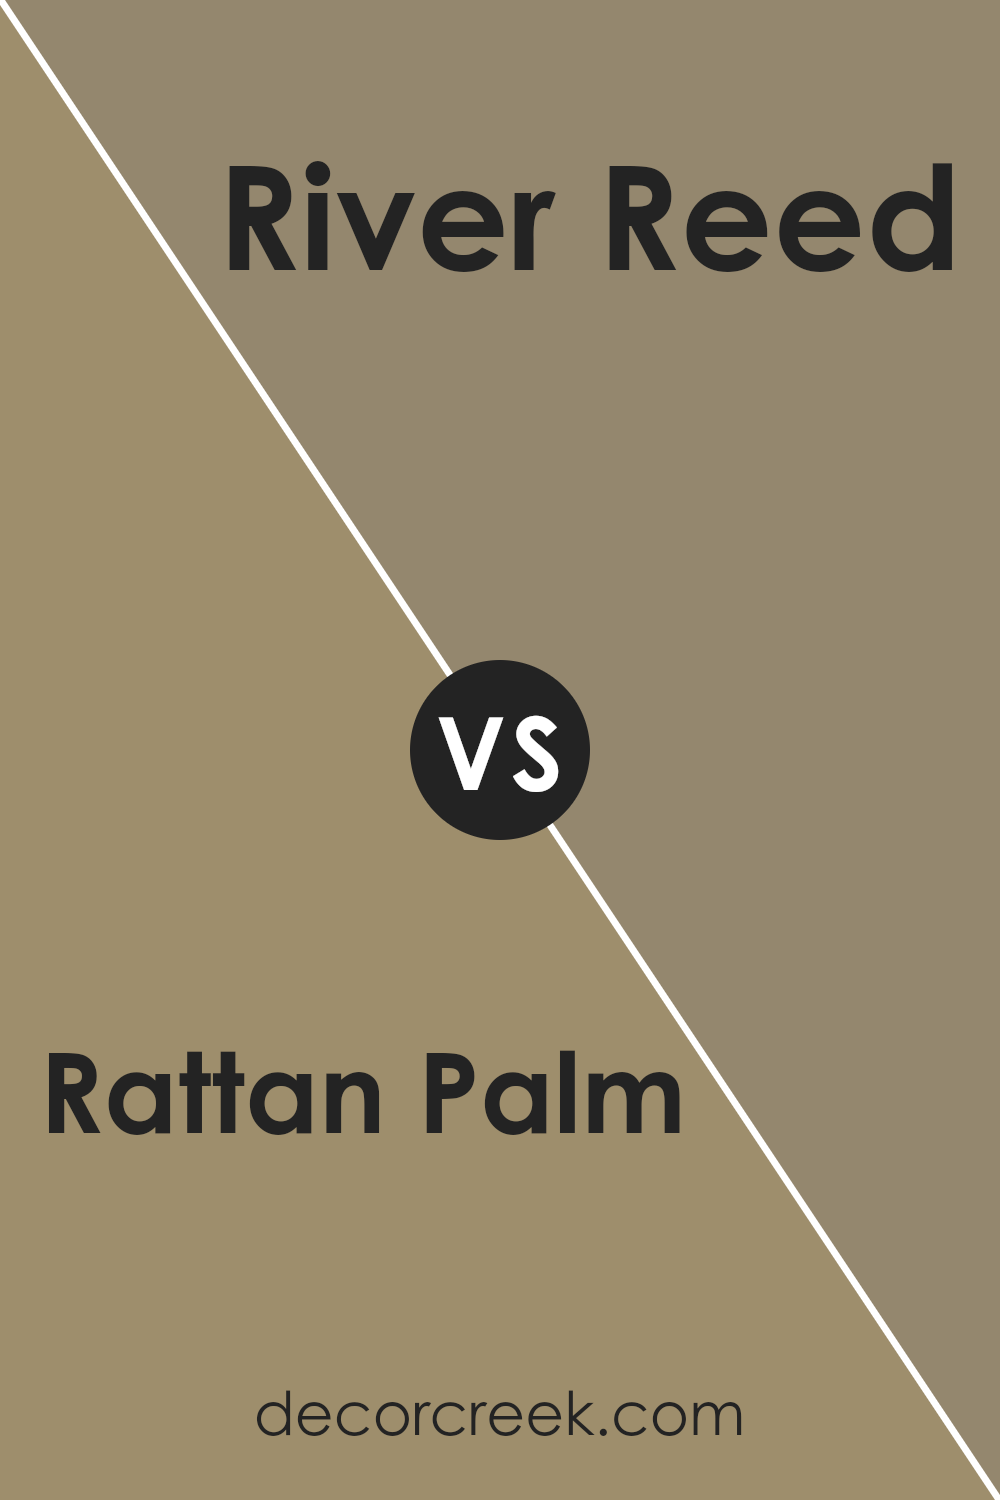 rattan_palm_sw_9533_vs_river_reed_sw_9534